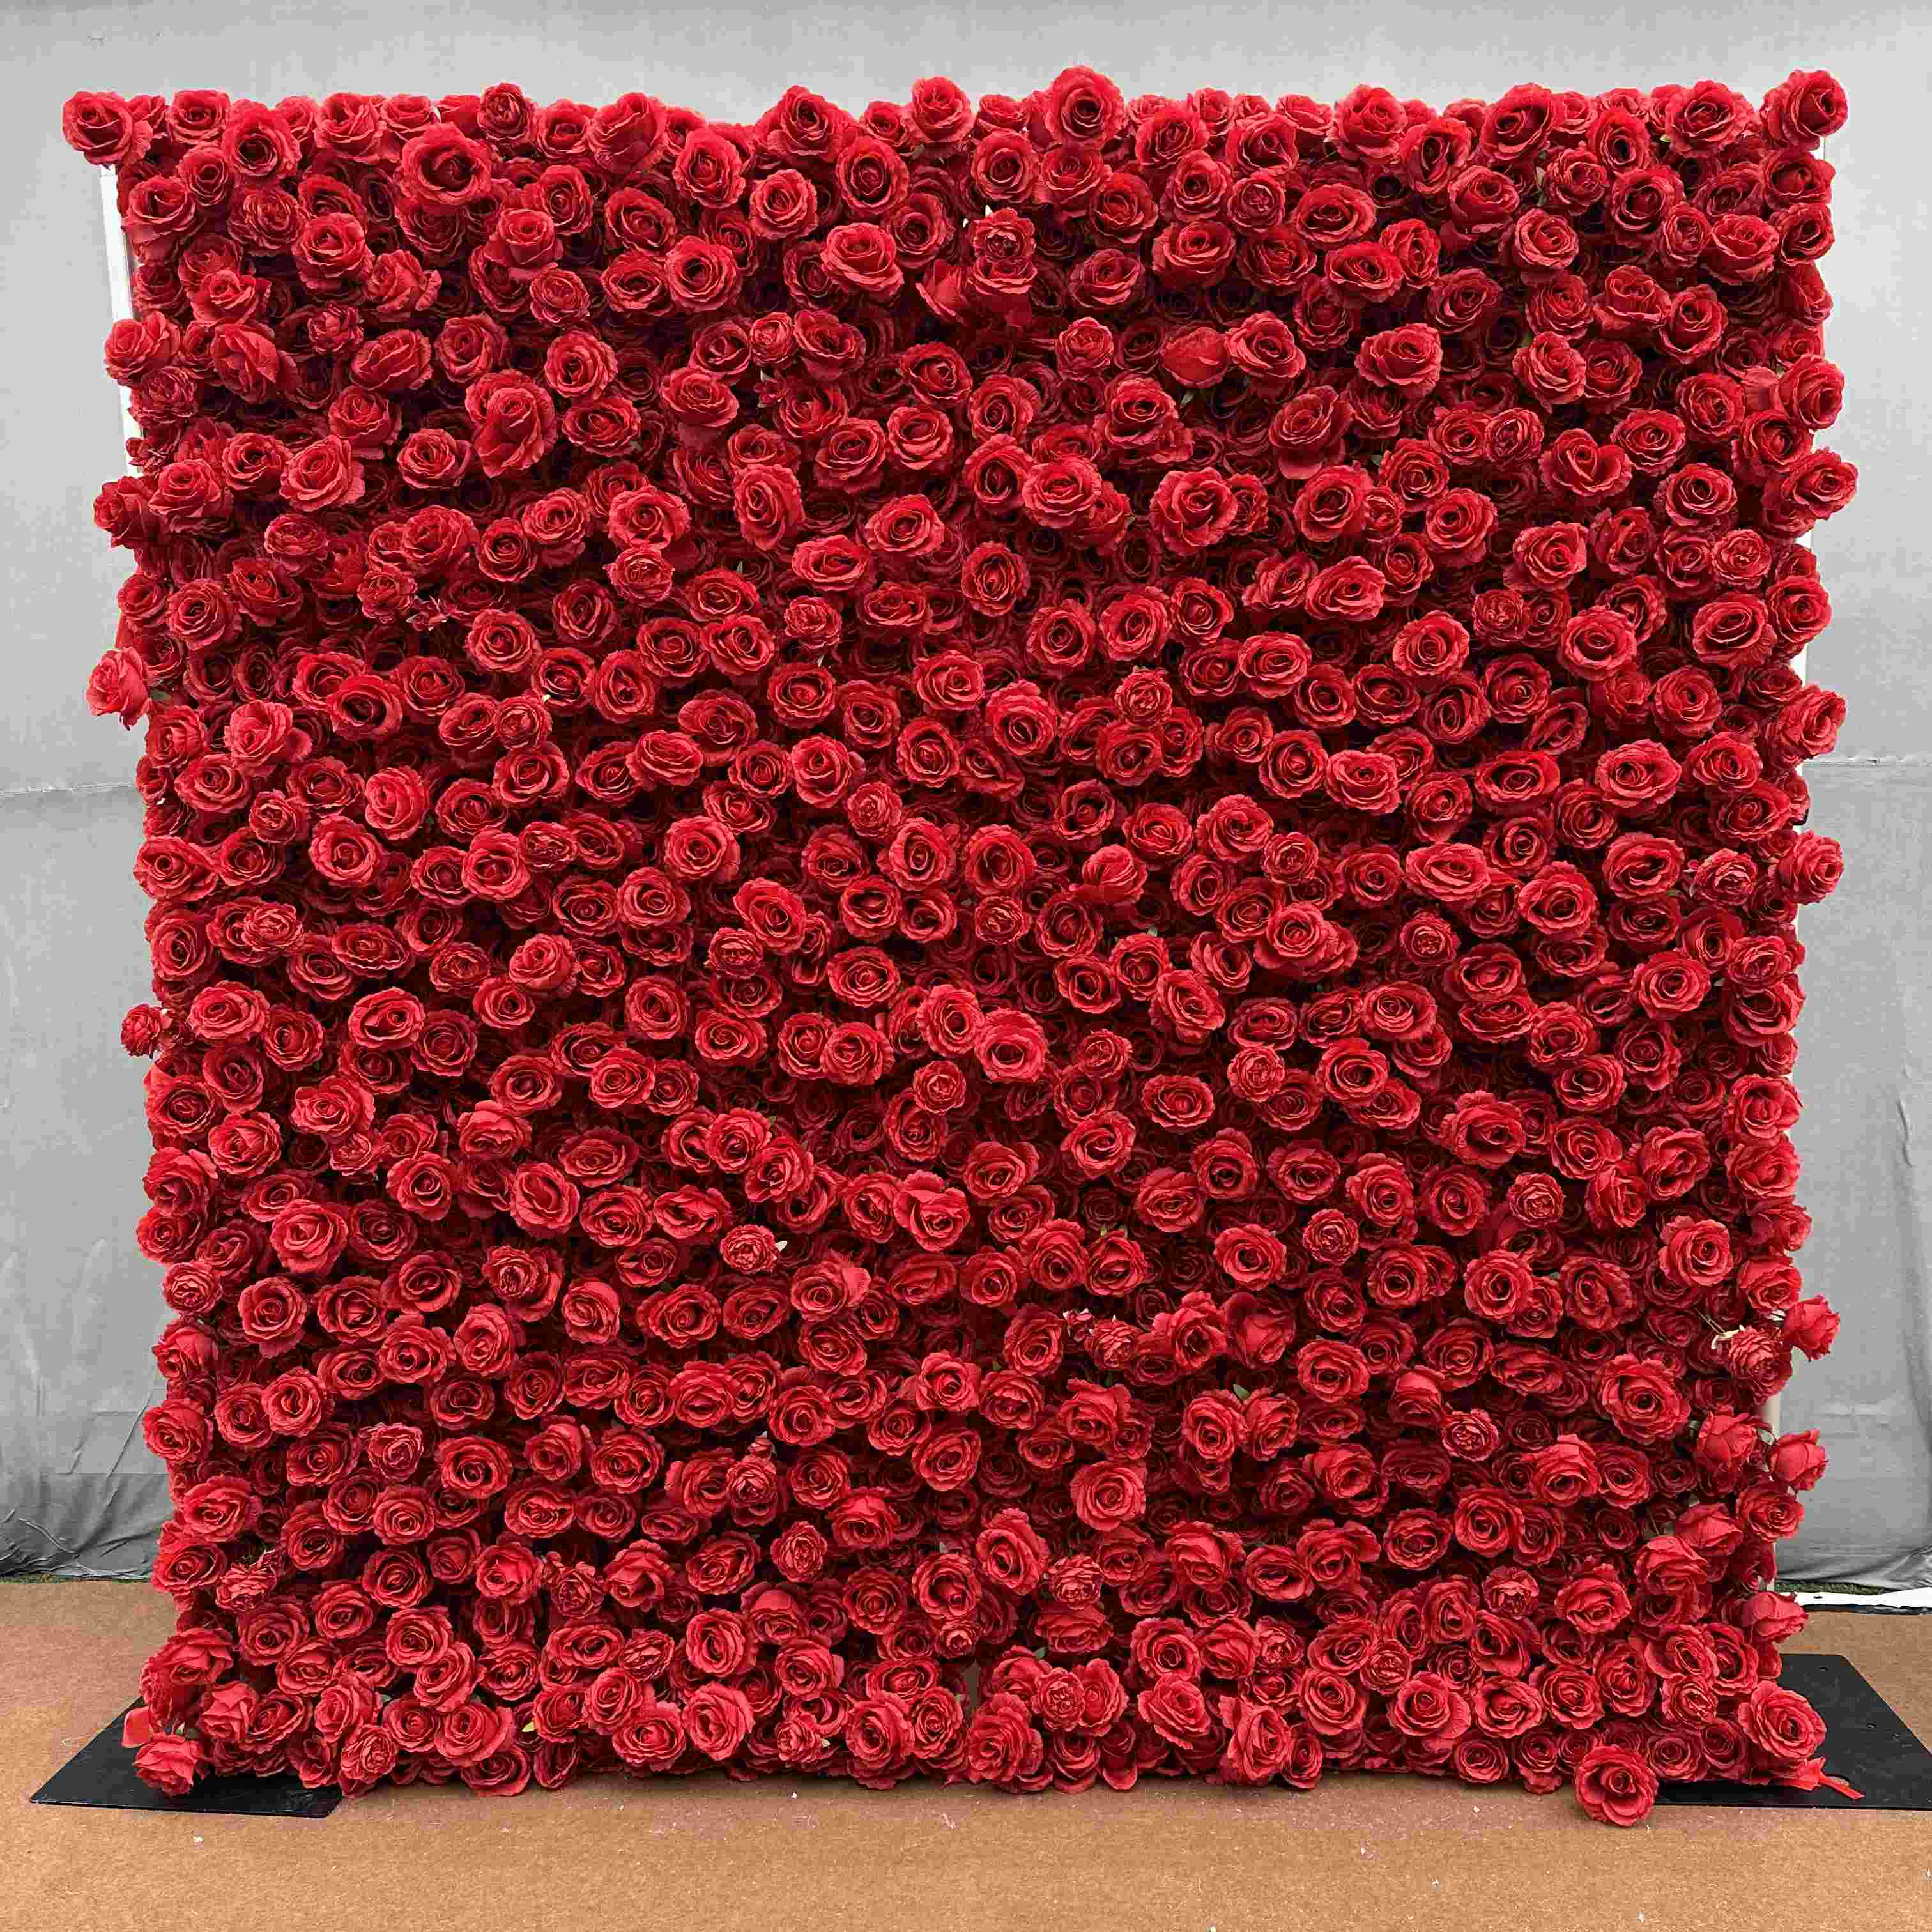 Red rose flower wall looks warm and romantic.